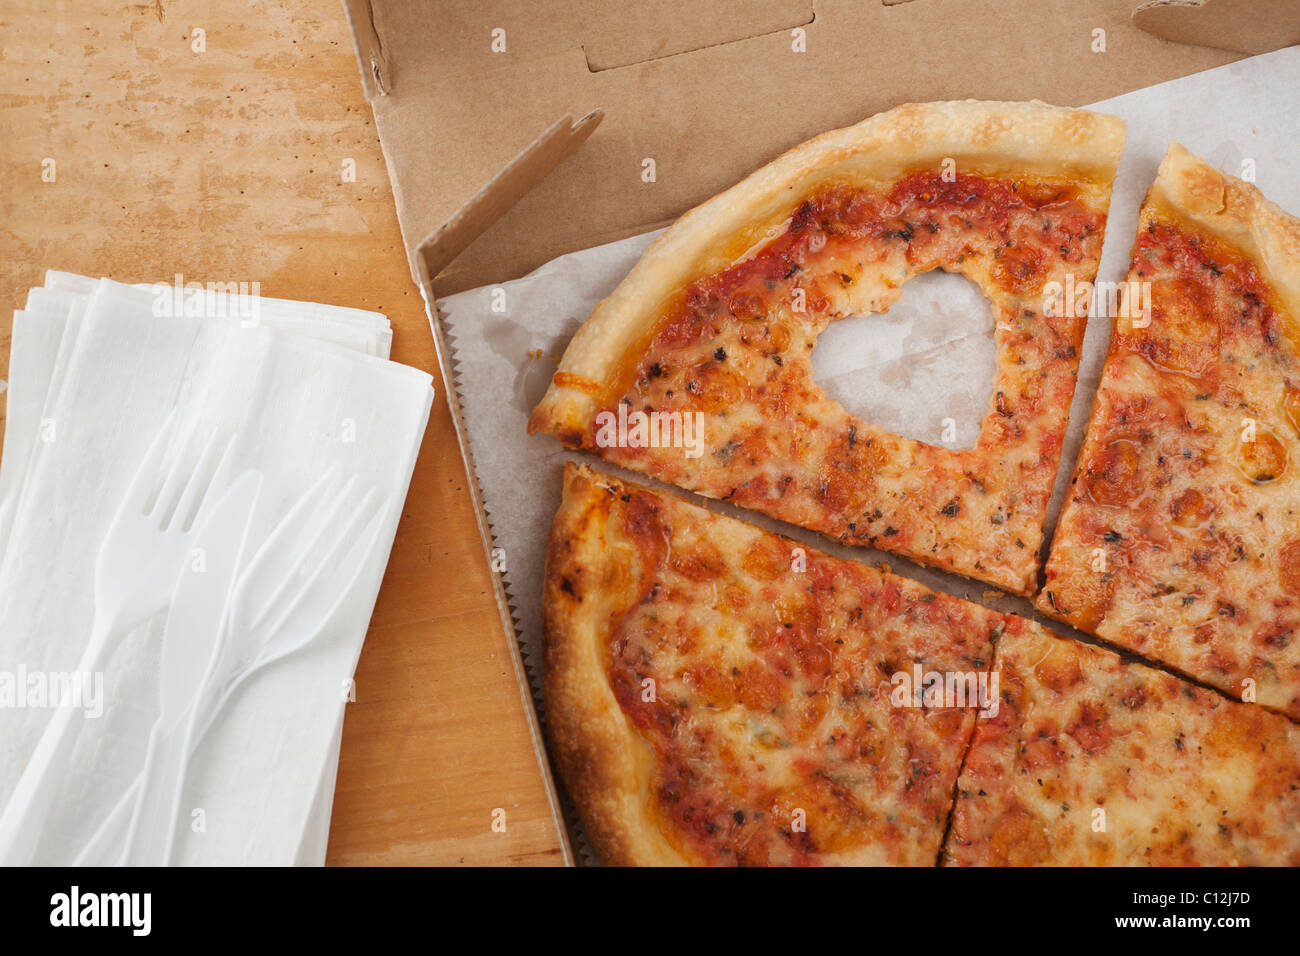 Pizza with missing heart shaped piece Stock Photo